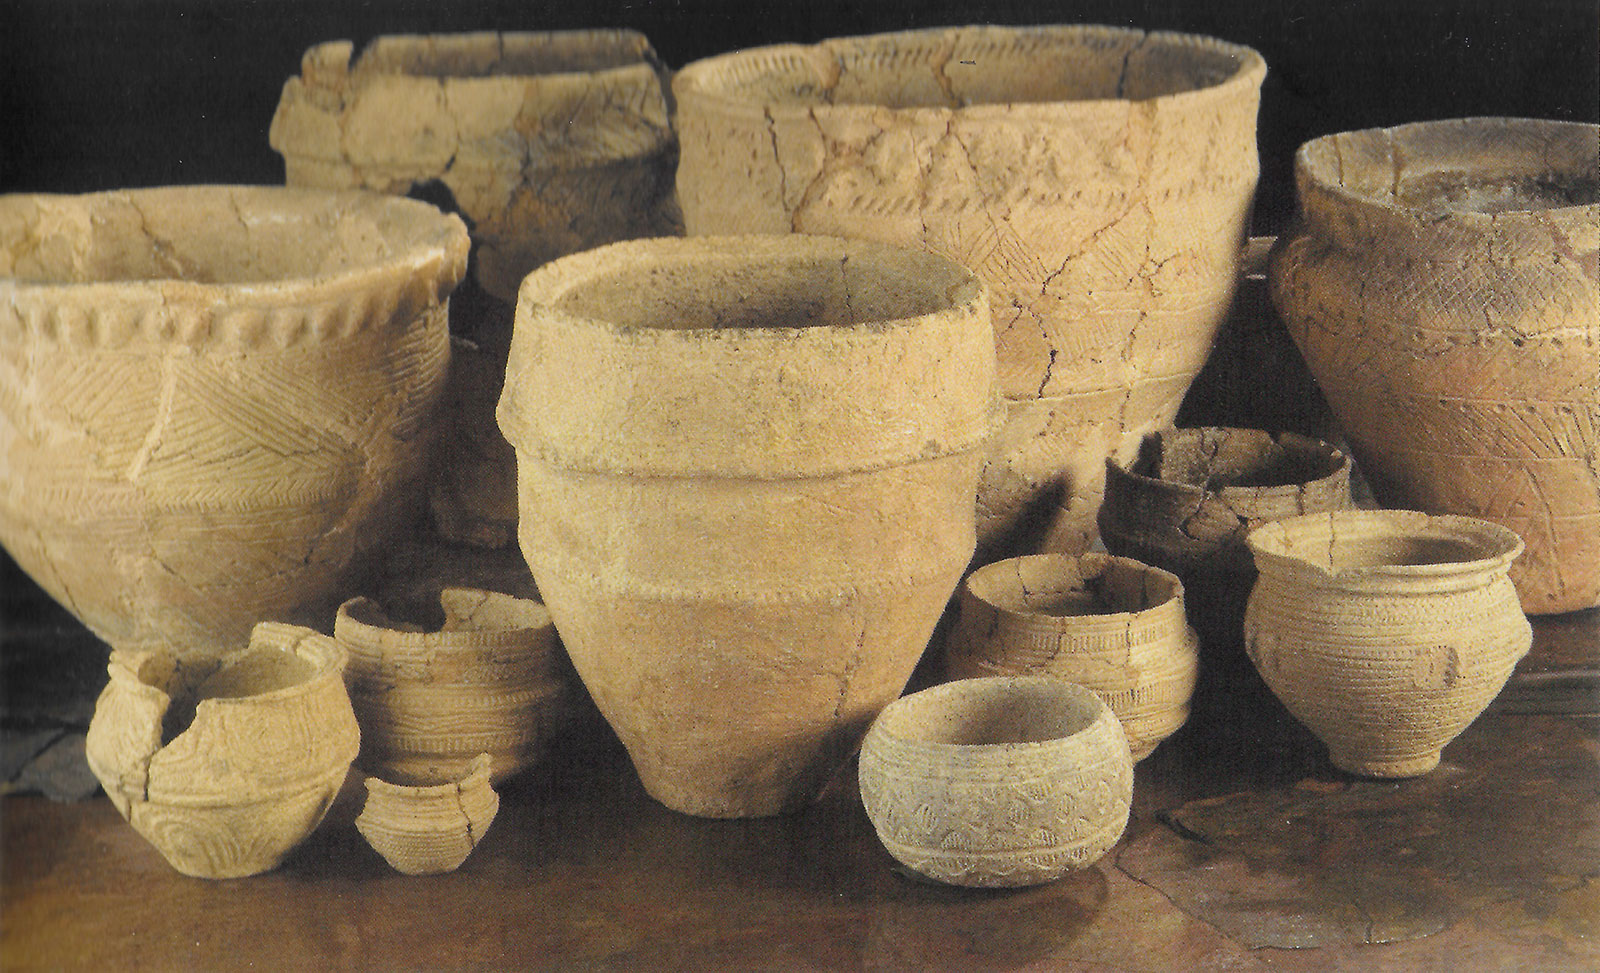 A selection of the bronze age pottery discvered during excavations in the Mound of the Hostages.